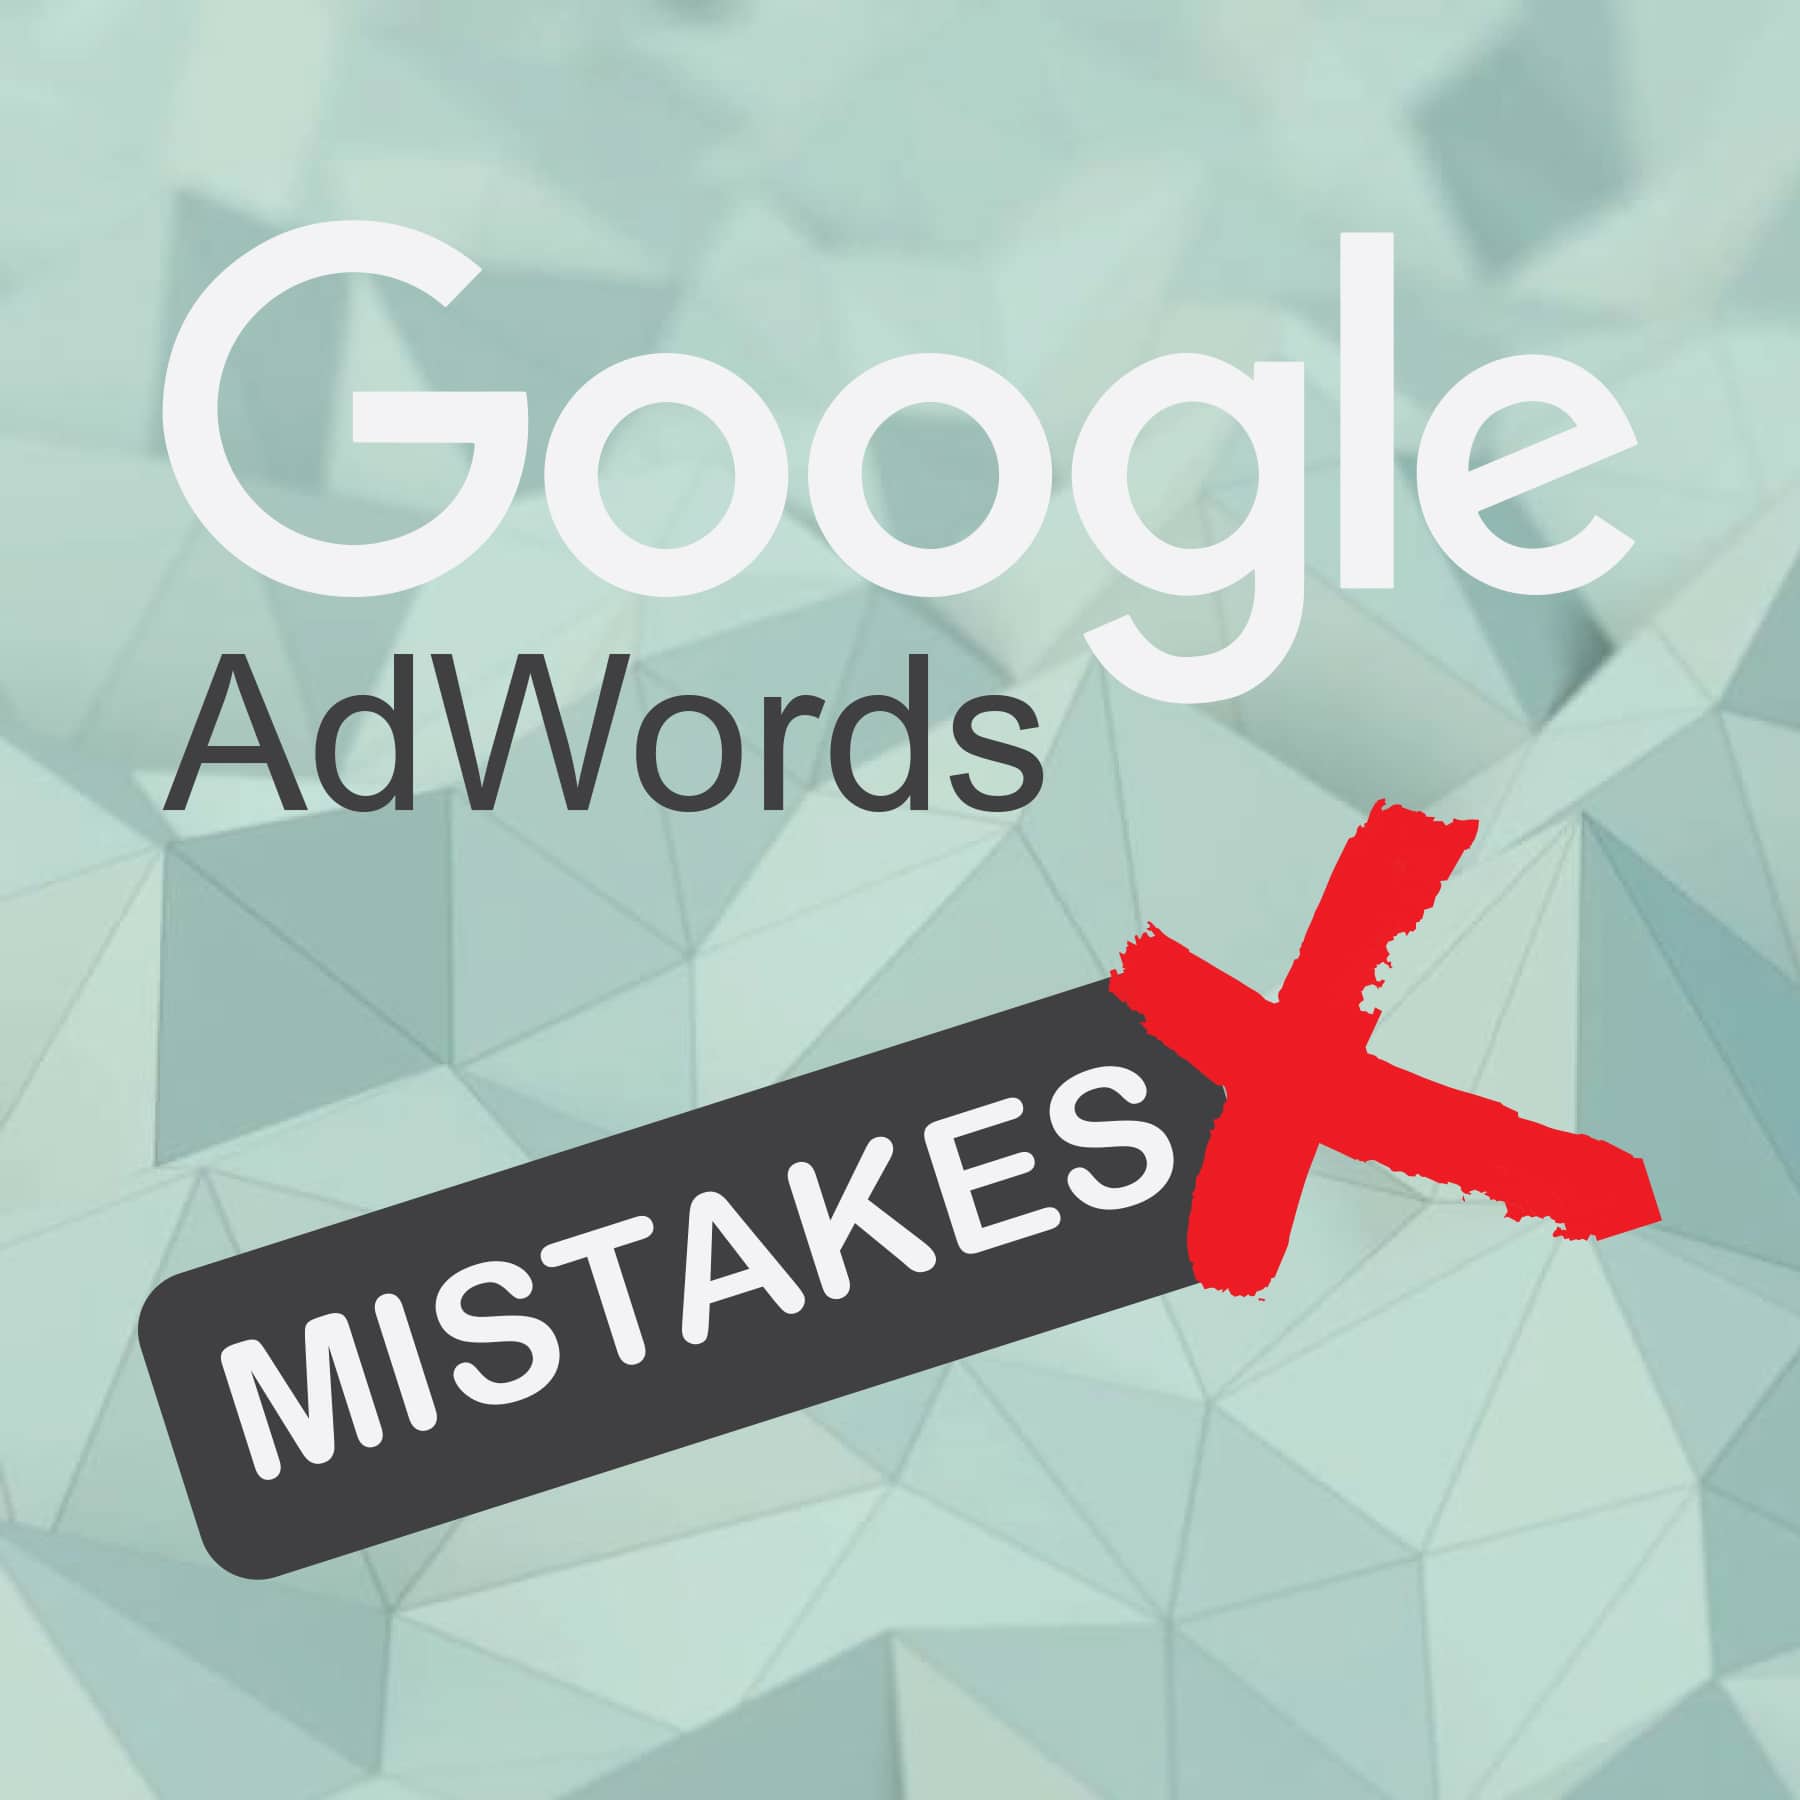 13 AdWords Mistakes Everyone Should Avoid Making